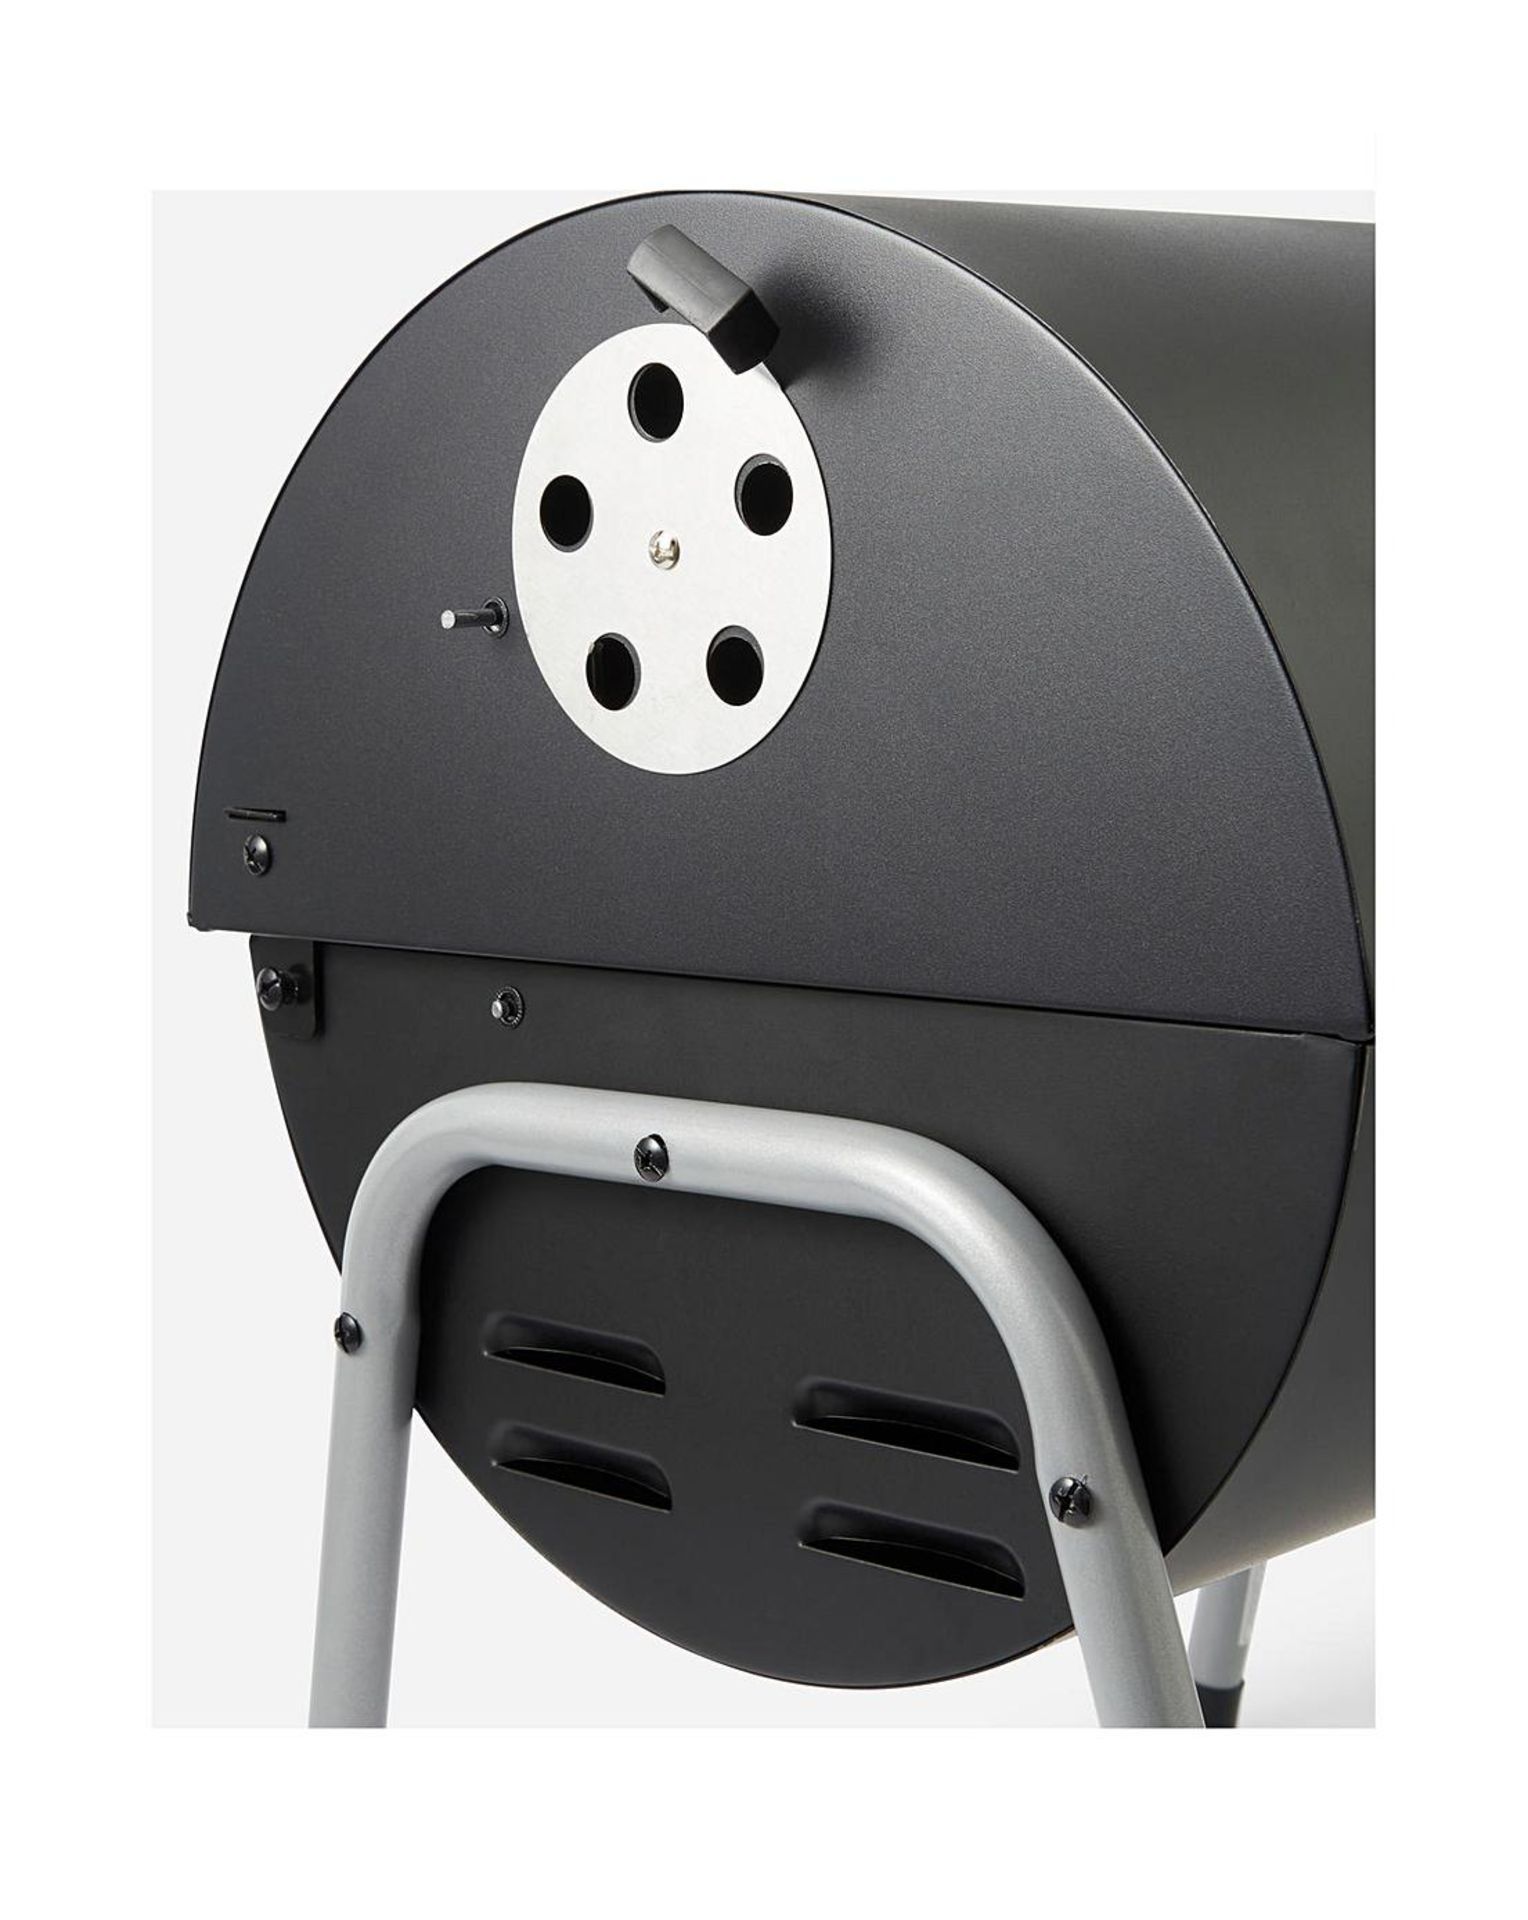 3x BRAND NEW Tabletop Oil Drum Barbeque Grill. RRP £59.99 EACH. Black steel firebowl with enamel - Image 4 of 4